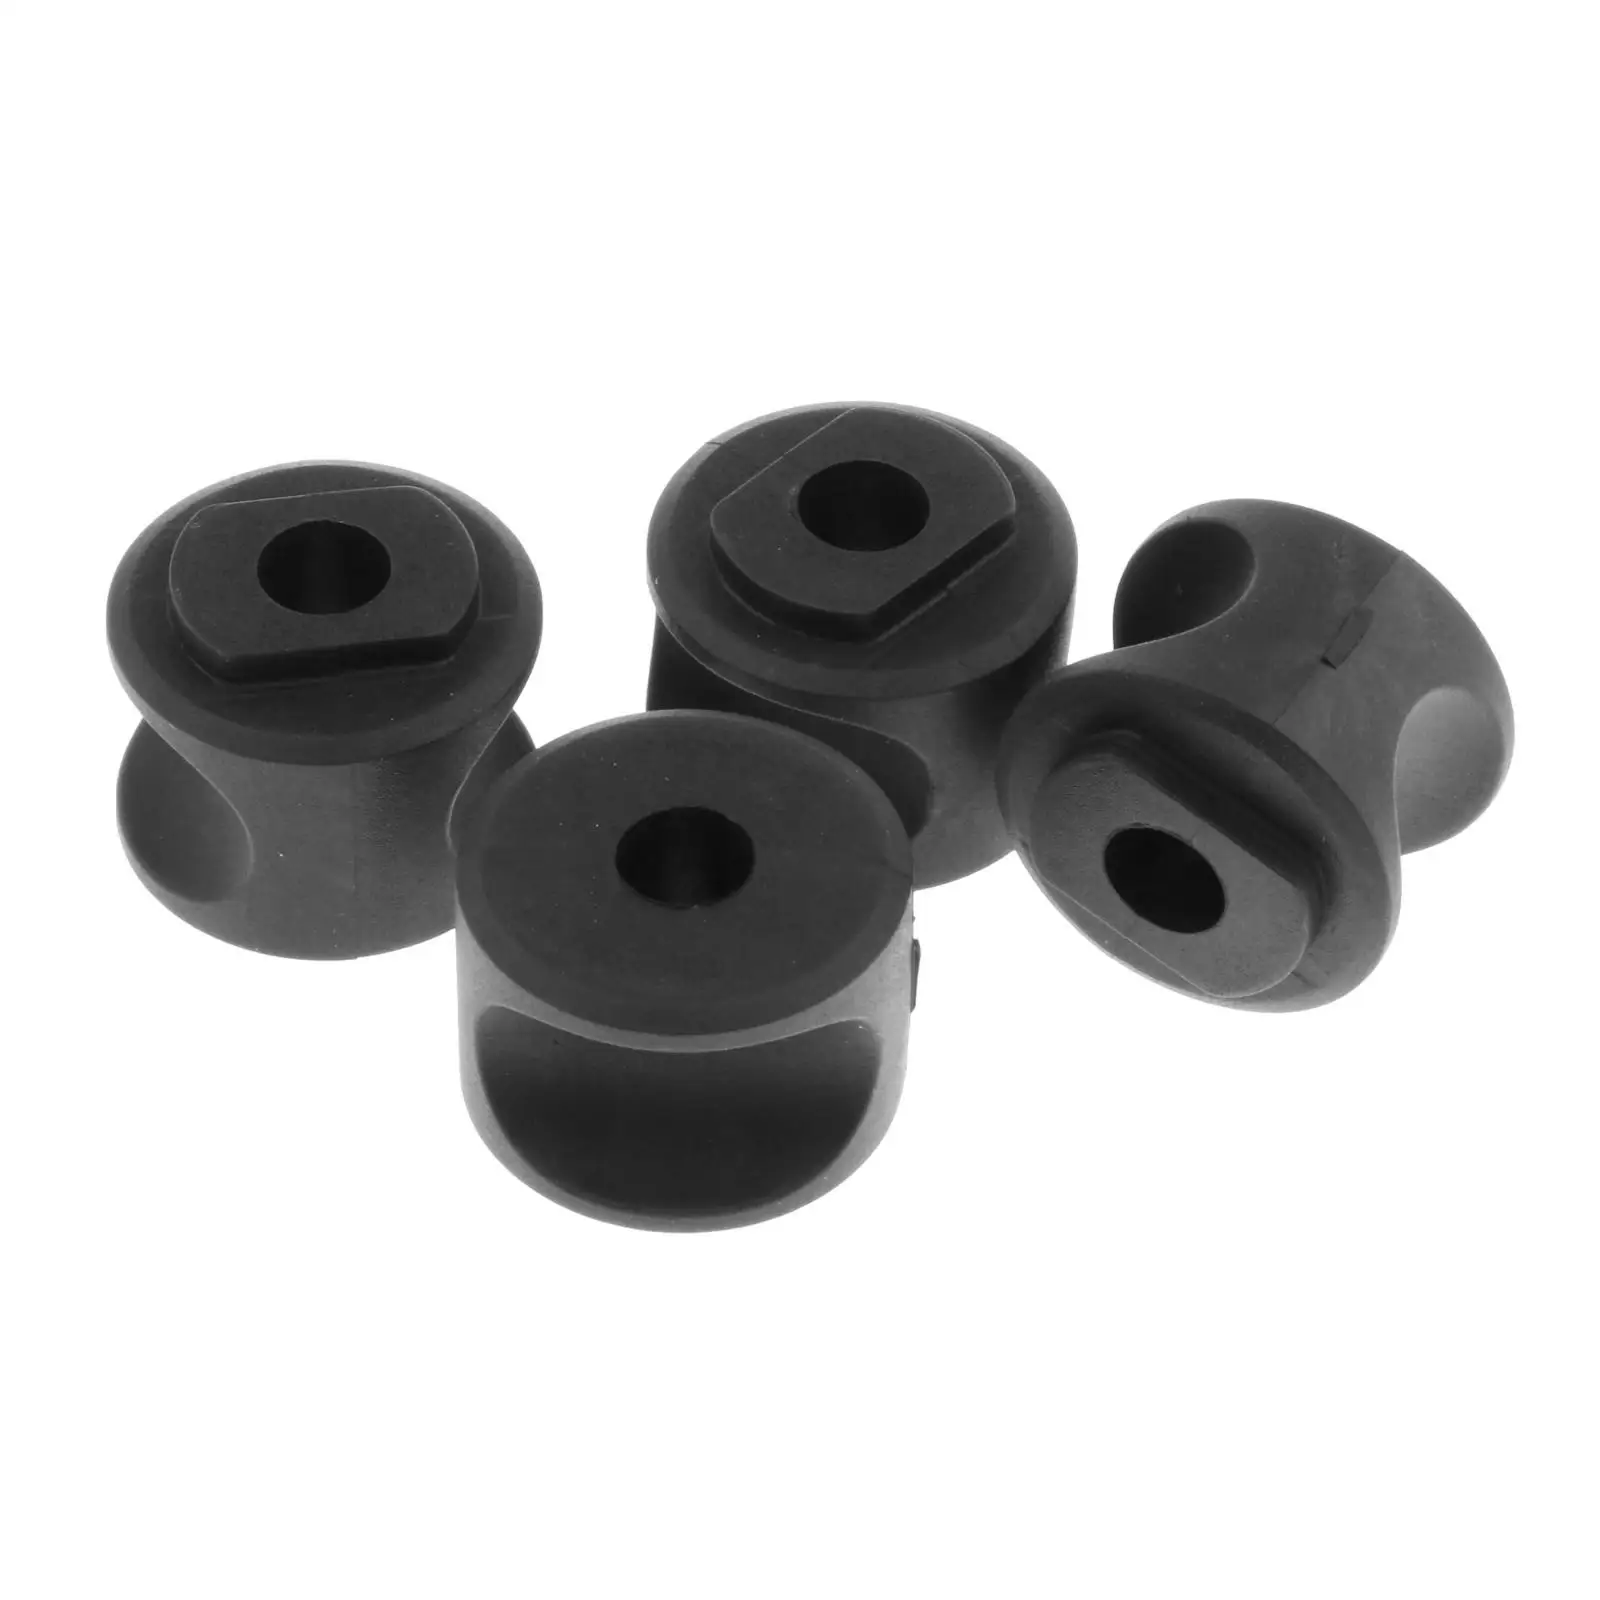  31 Inch / 31mm Rear Stabilizer Support Bushing Easy to Replace for ATV